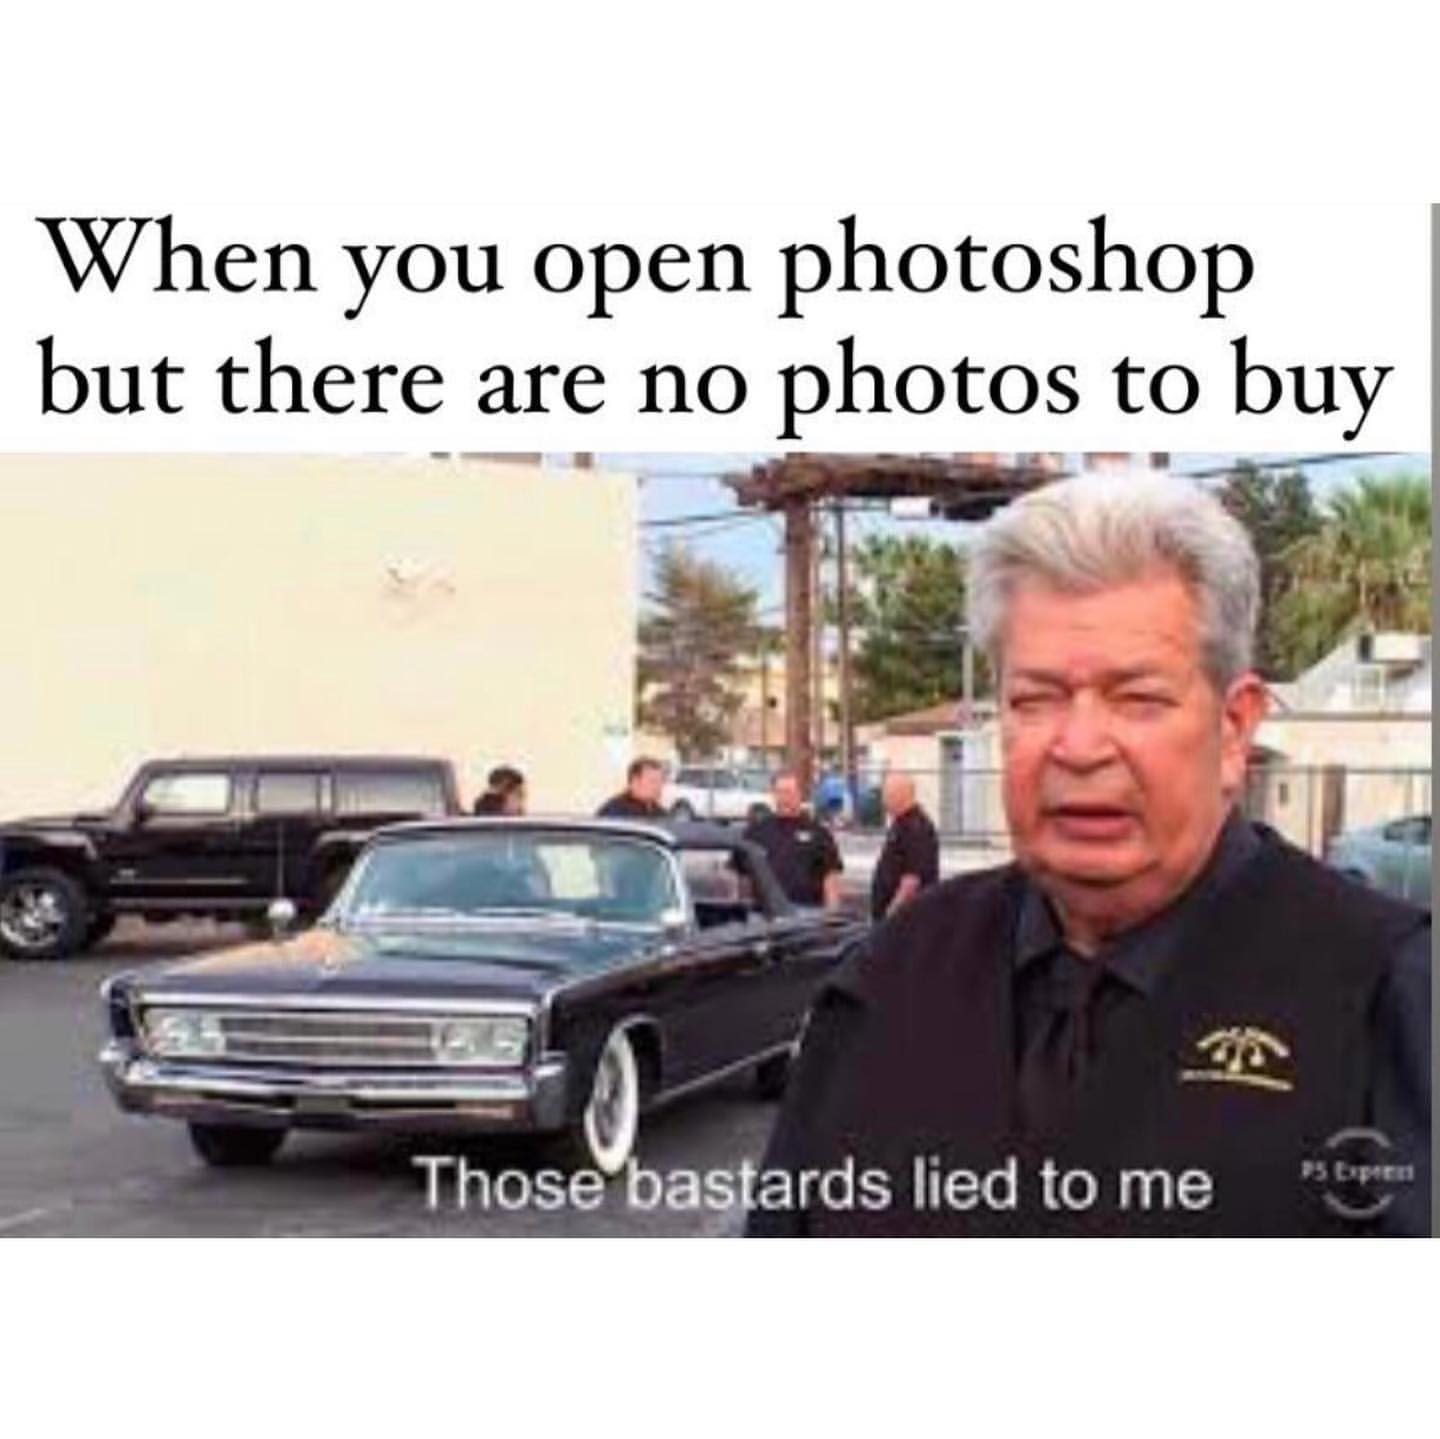 When you open photoshop but there are no photos to buy. Those bastards lied to me.